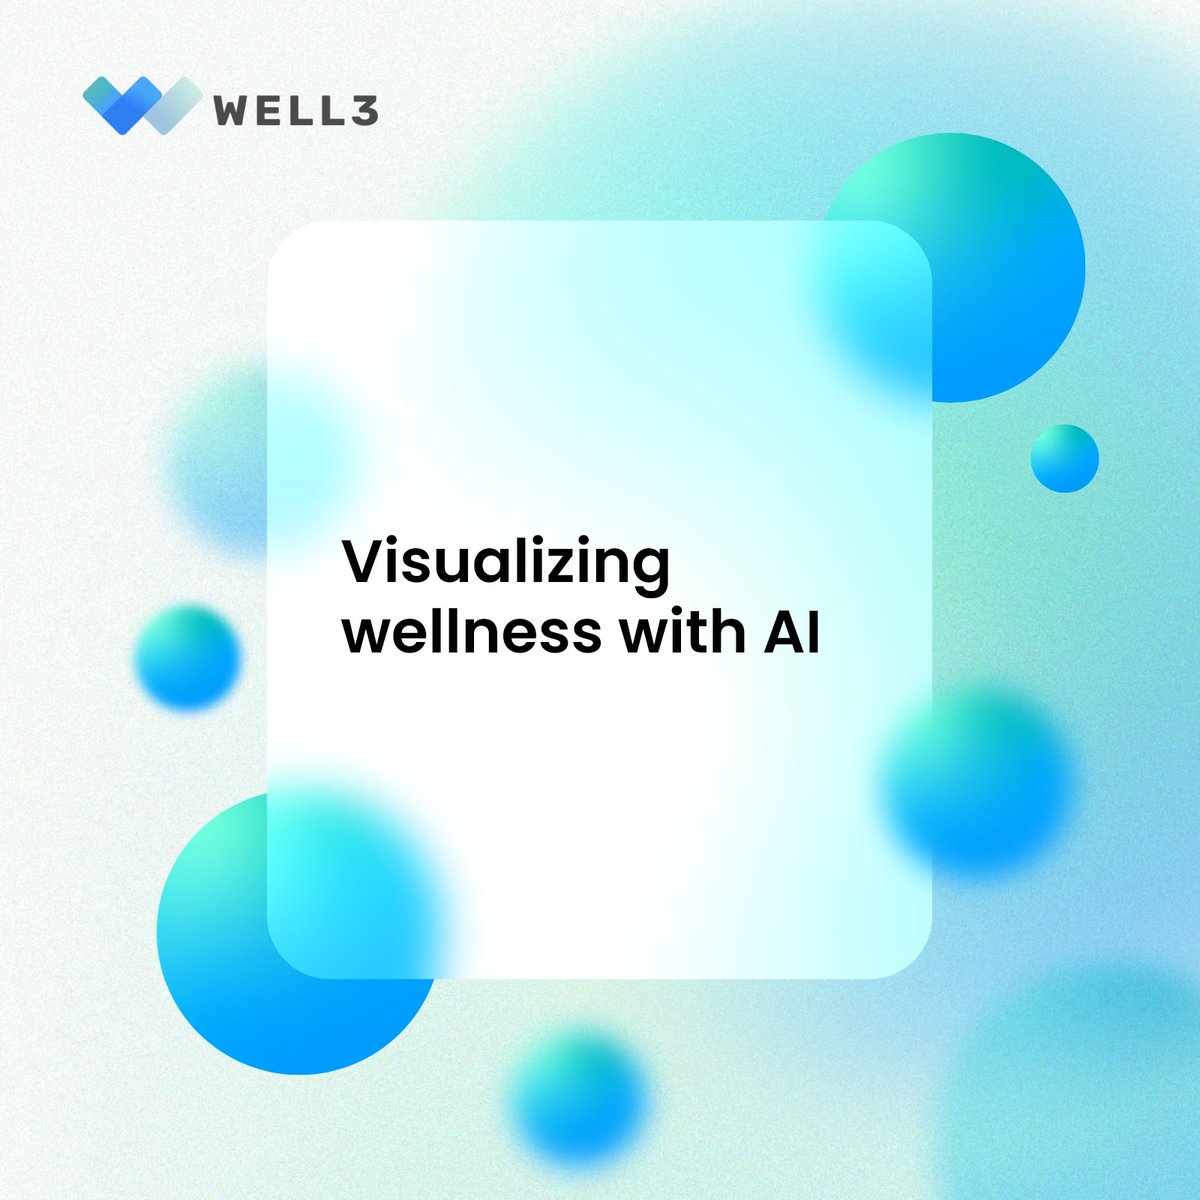 Visualizing Wellness With AI Since its launch on Feb 10th, WELL3NFT has become the largest NFT collection on the @BNBCHAIN #opBNB with 7.1M NFTs created It's a novel fusion of wellness and technology that offers a new FREE-to-mint form of expression Here's all you need to…